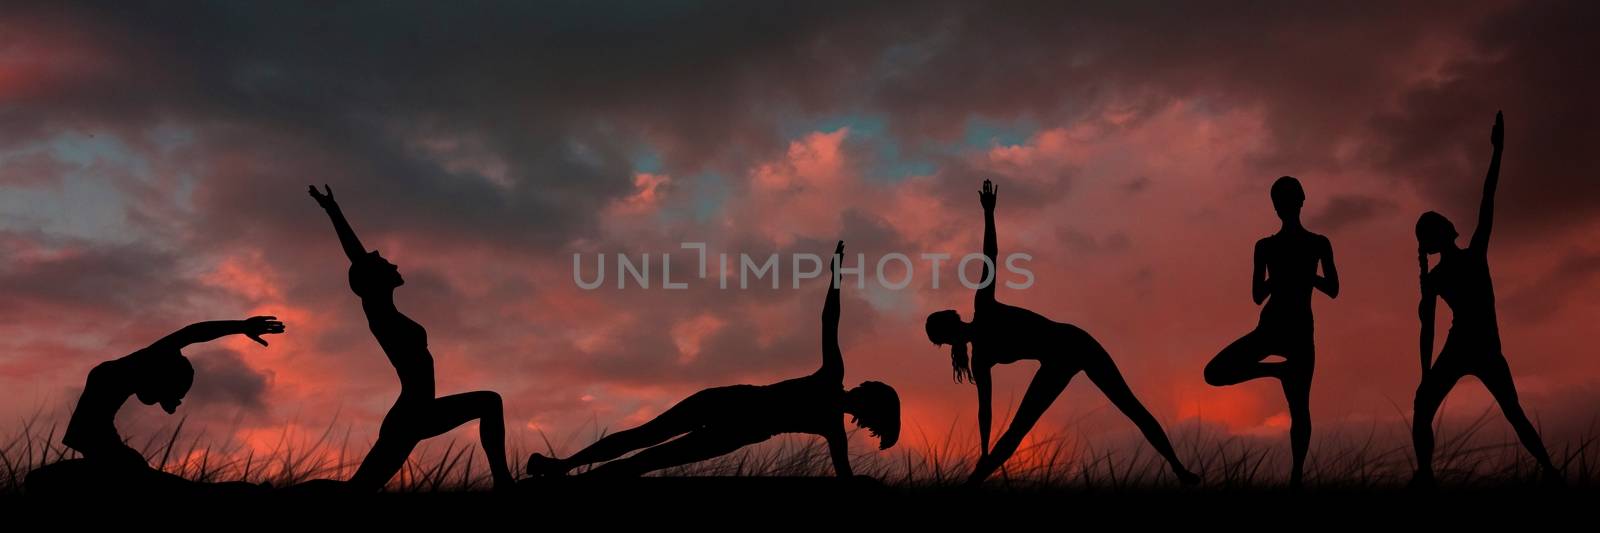 yoga group silhouette at sunset by Wavebreakmedia